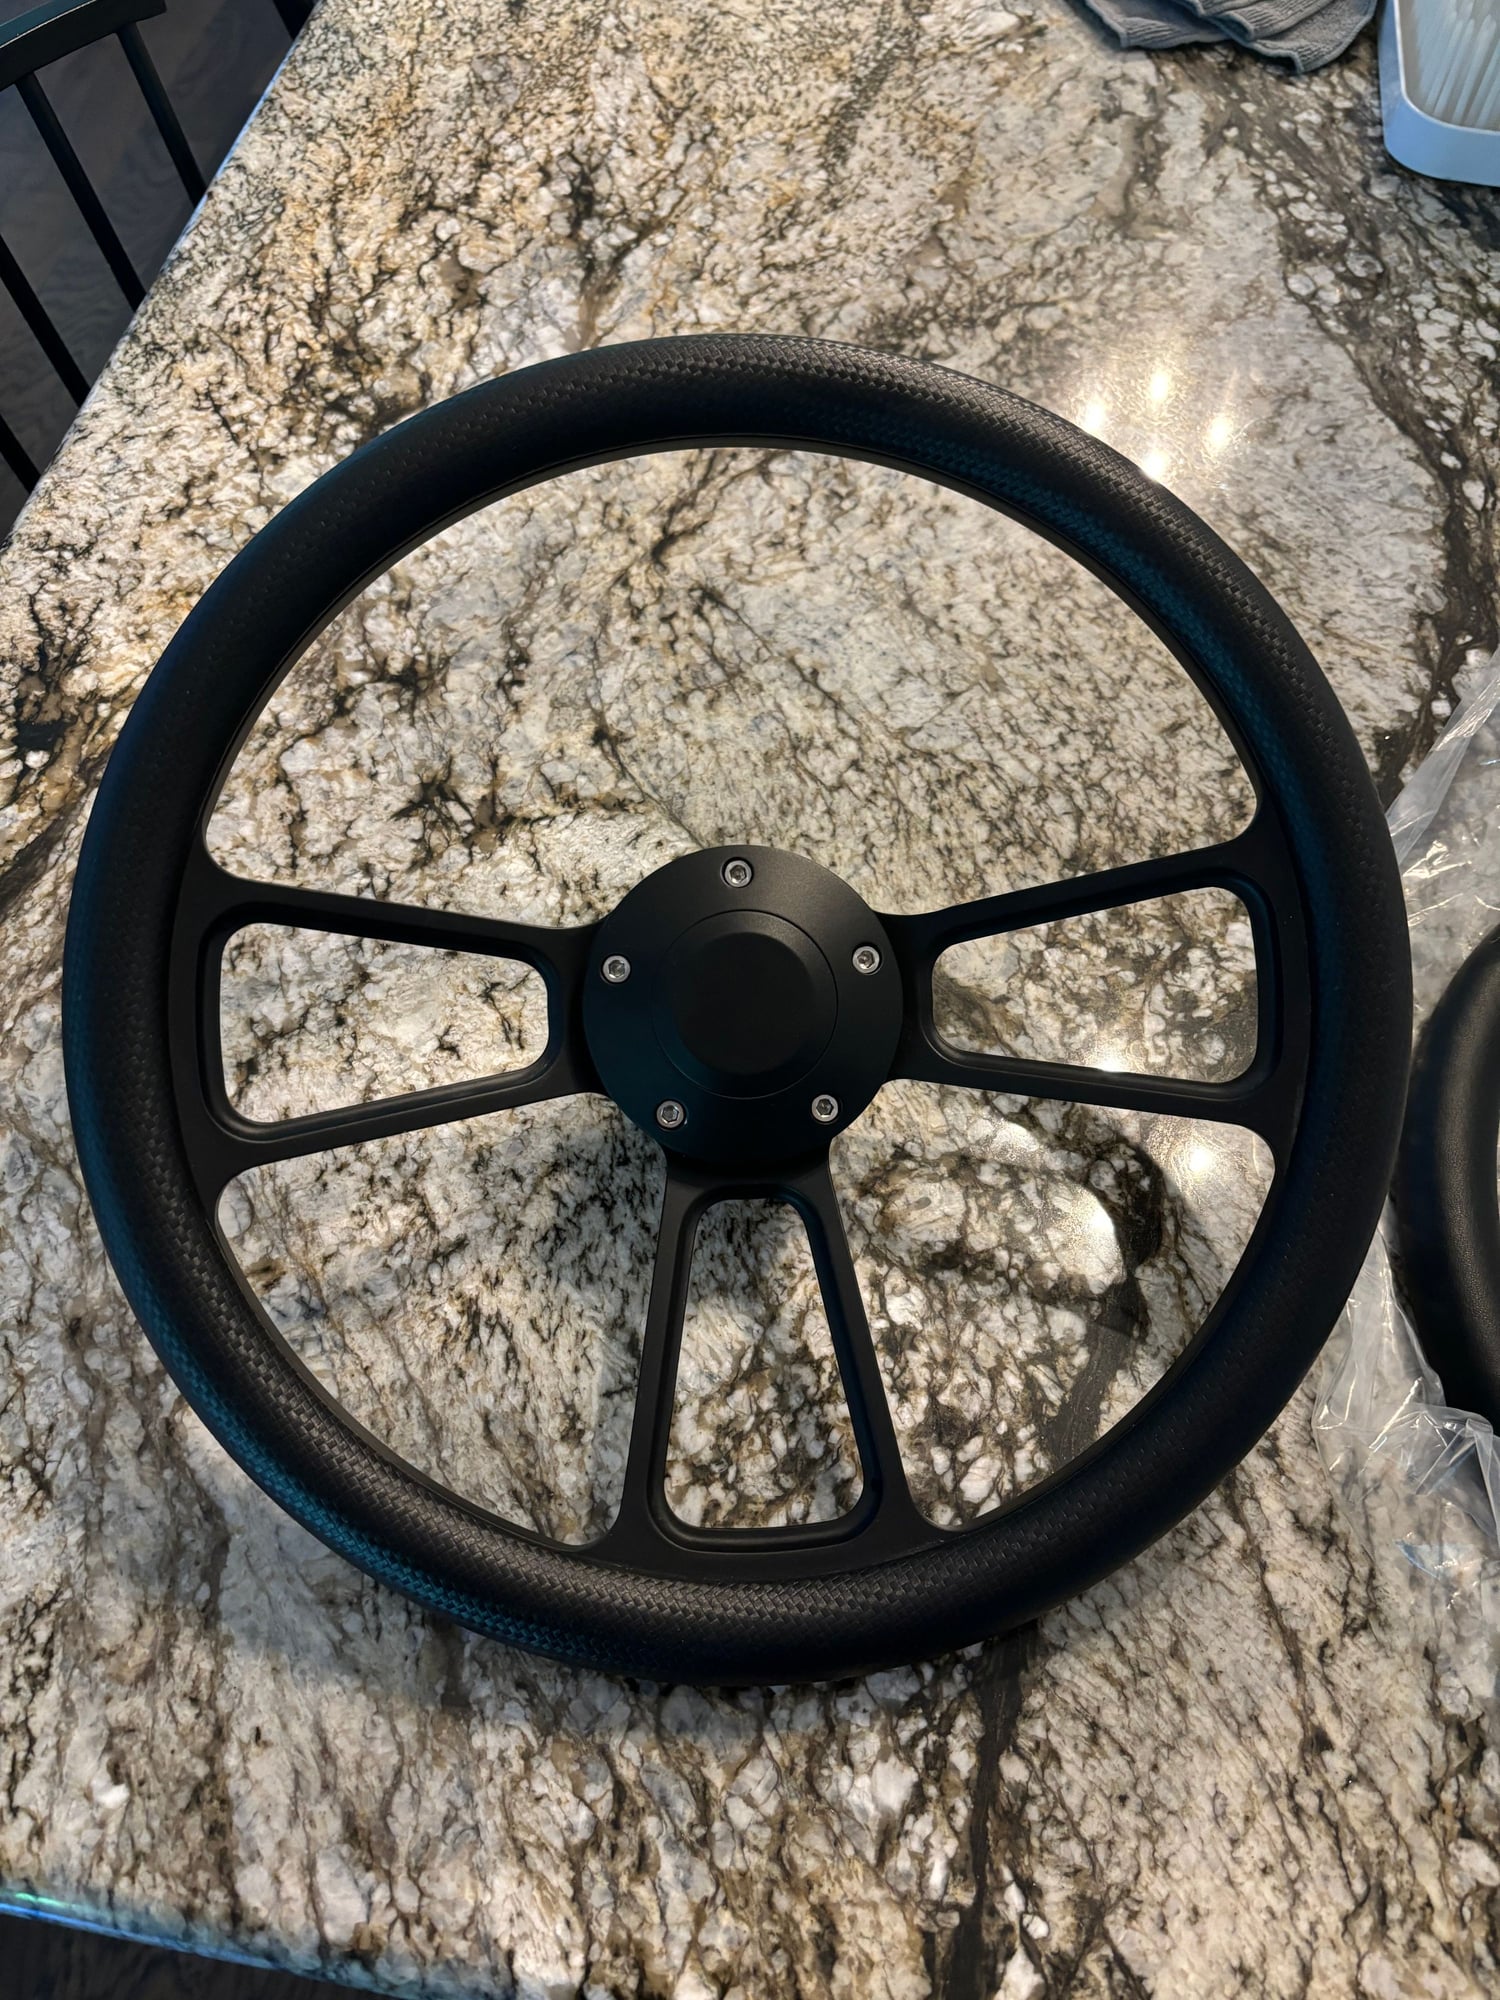 Steering/Suspension - Forever Sharp Steering wheel, quick release hub, wraps - Used - All Years  All Models - Austin, TX 78620, United States